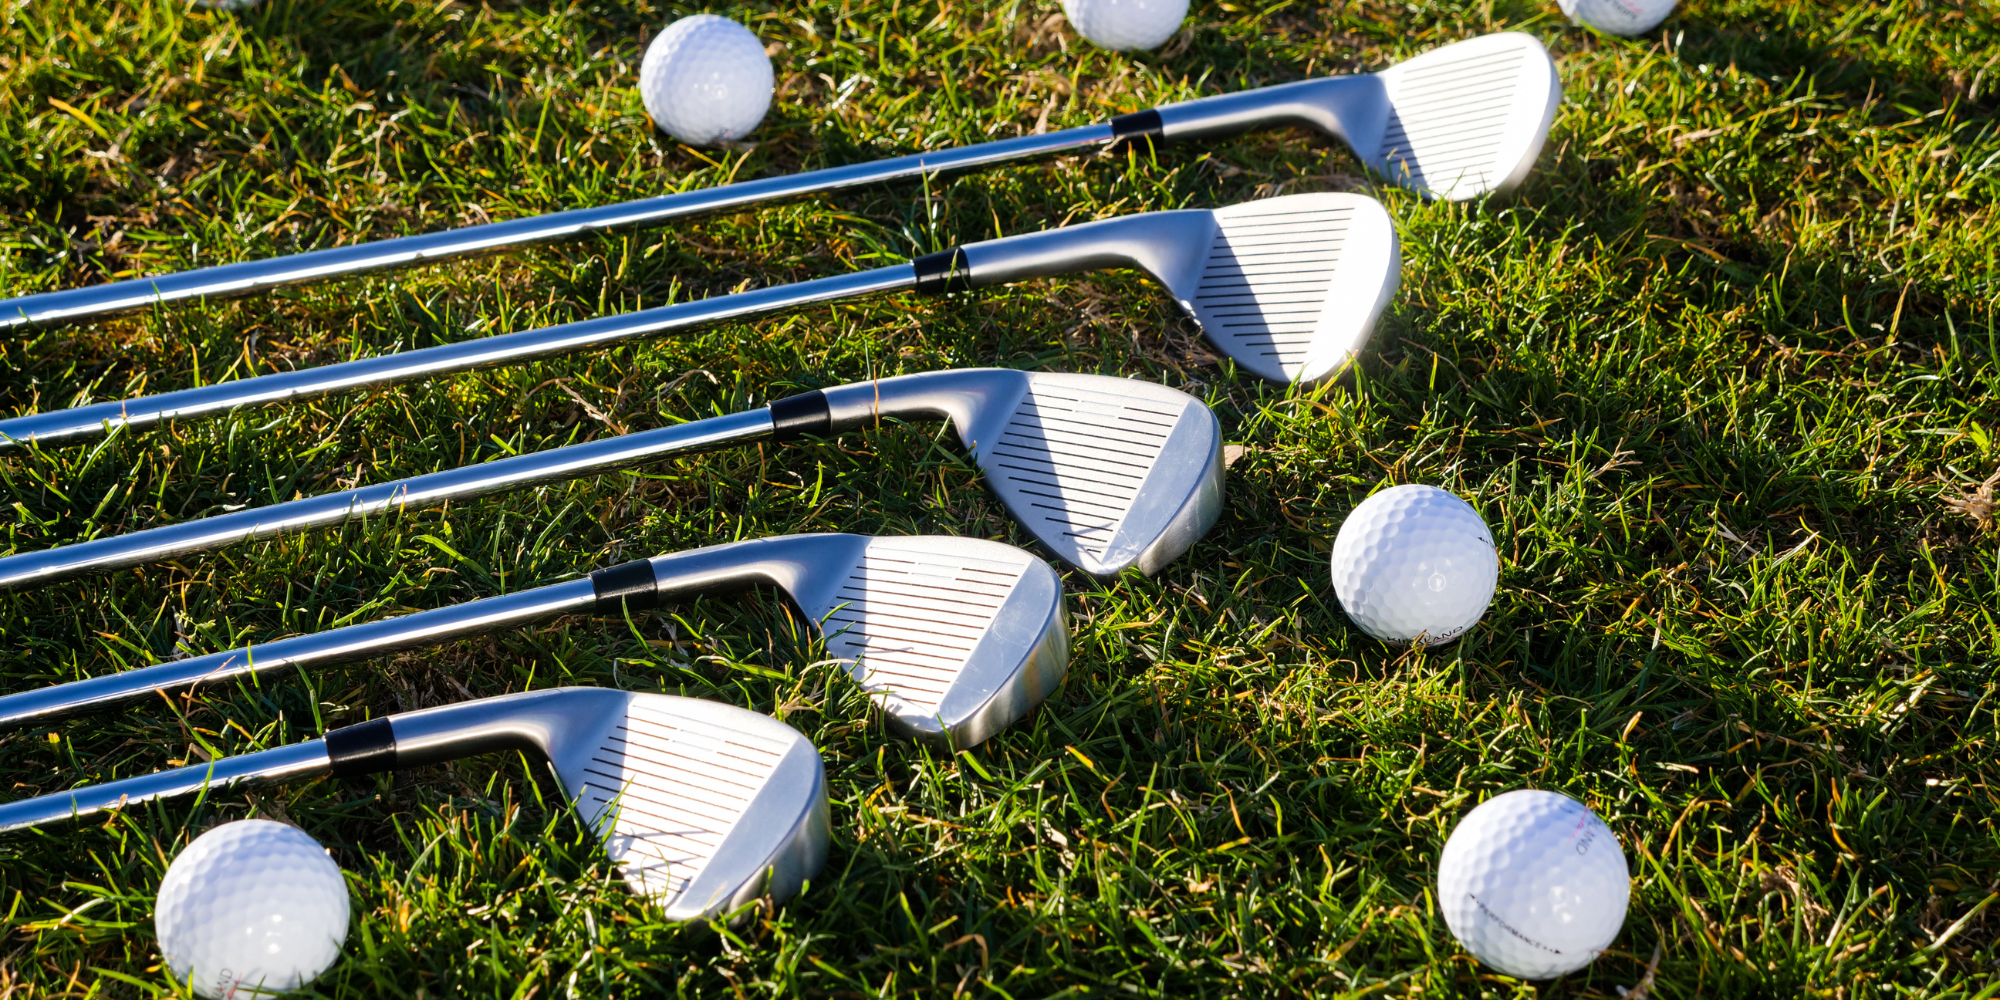 What are the key components in building a bespoke driver and how will it benefit your game